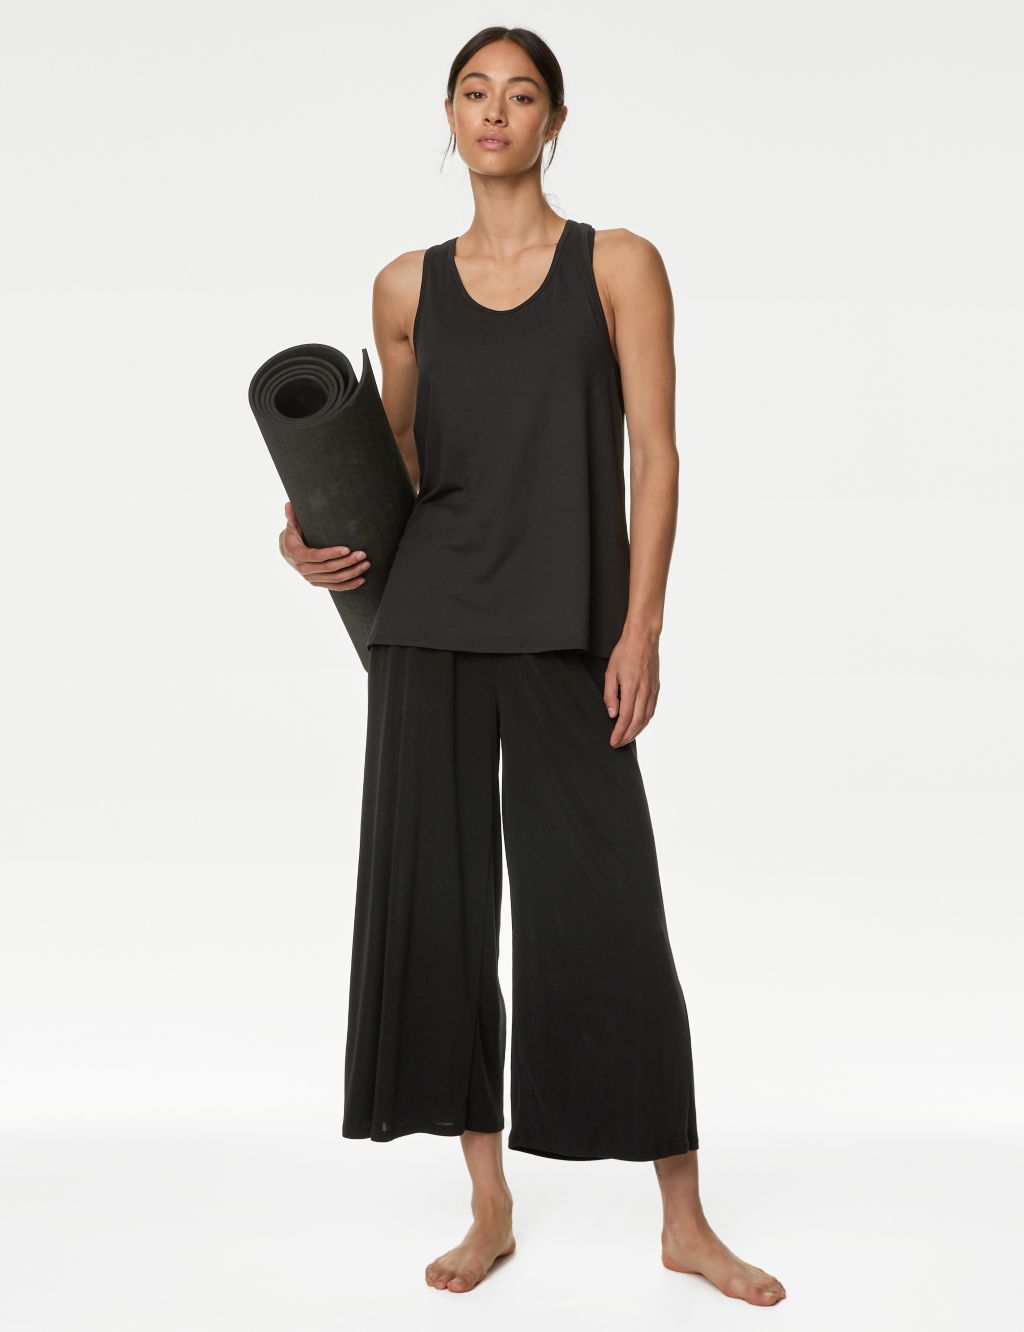 https://asset1.cxnmarksandspencer.com/is/image/mands/Scoop-Neck-Relaxed-Sleeveless-Yoga-Top/SD_01_T51_5162_Y0_X_EC_0?$PDP_IMAGEGRID$&wid=1024&qlt=80